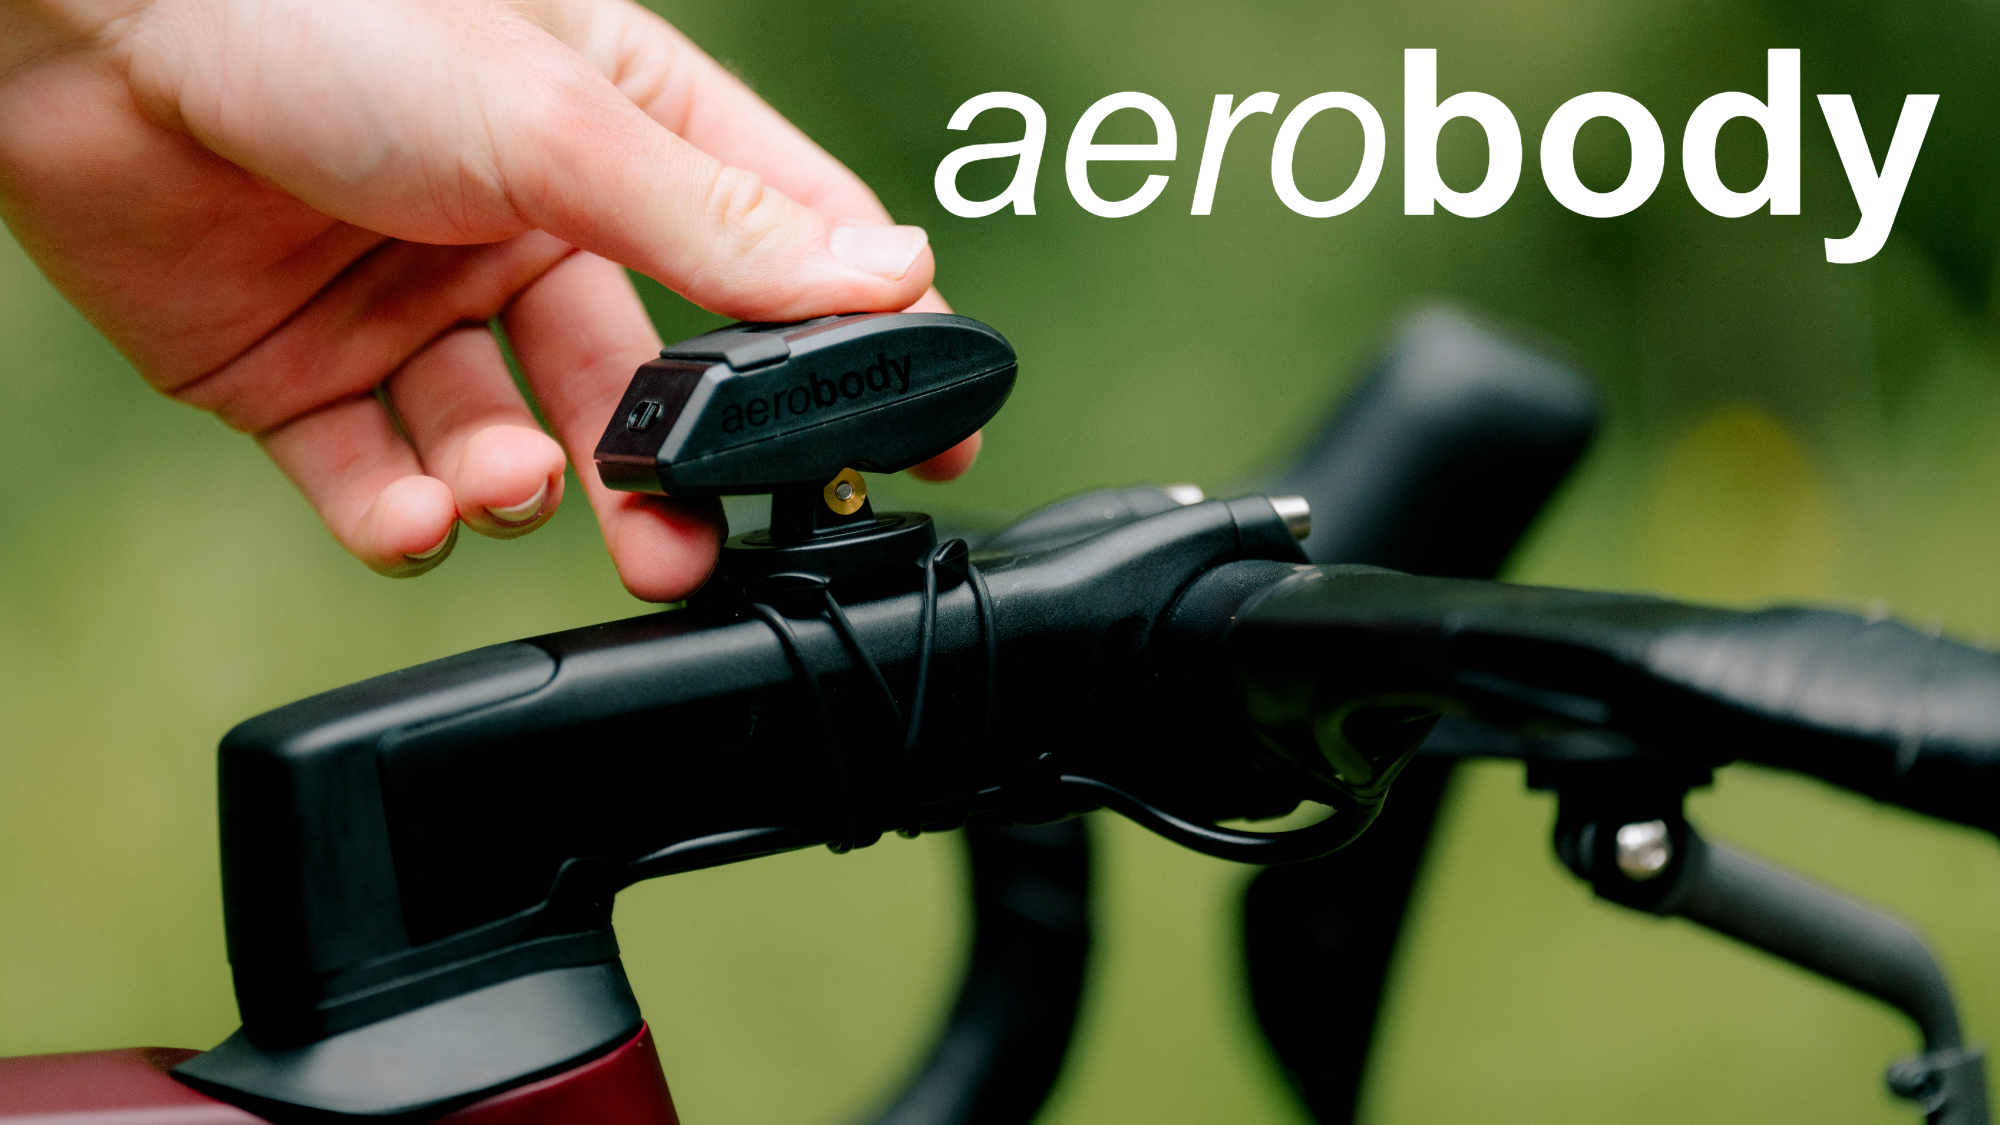 aerobody cycling device promotional video cover photo